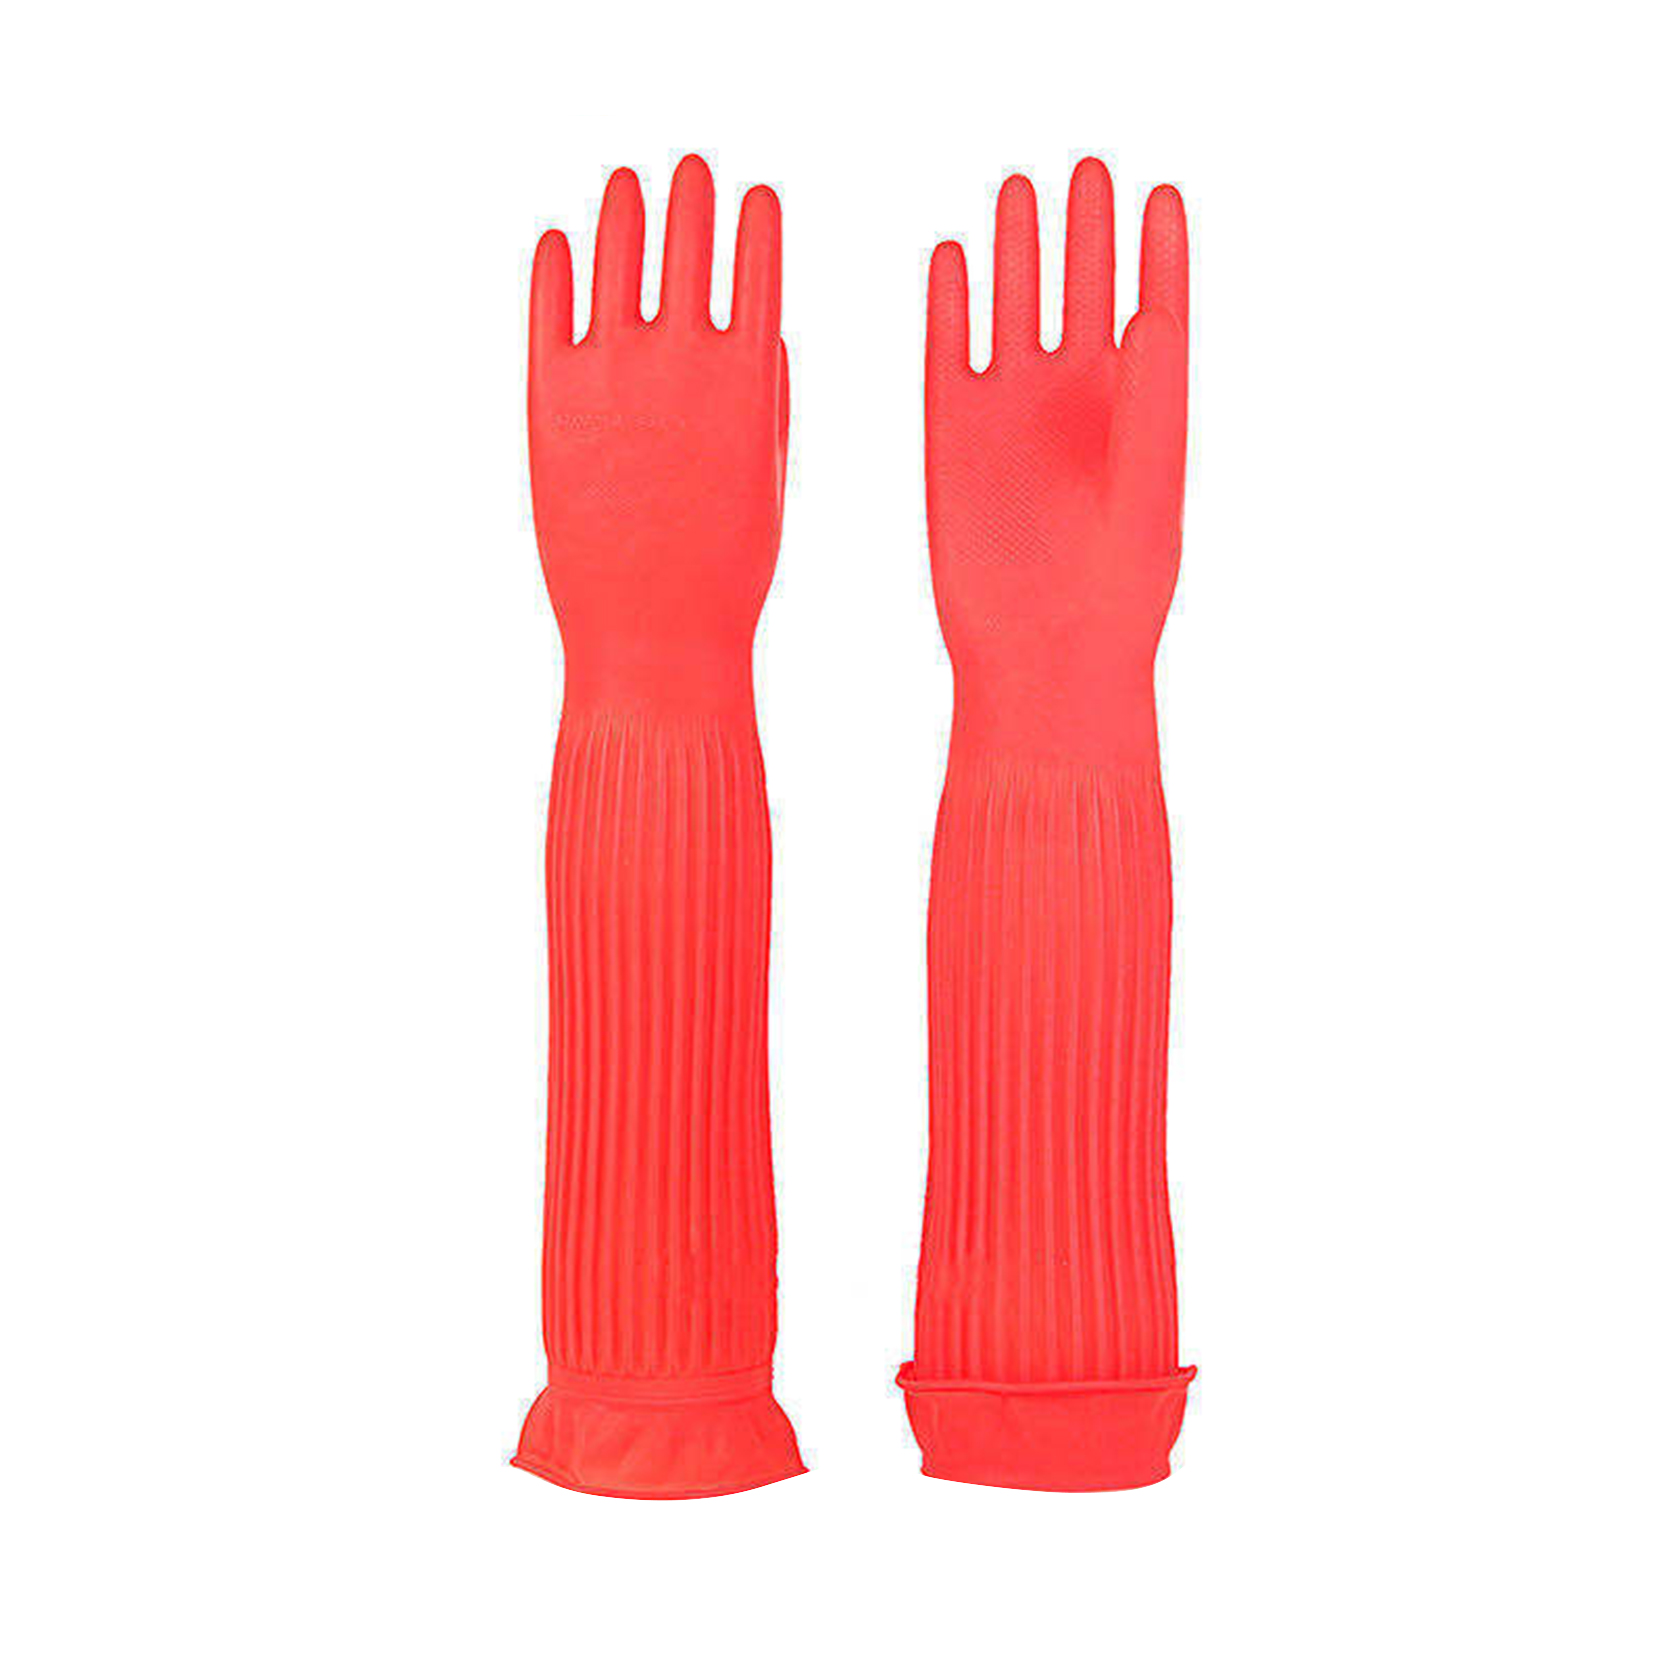 Reusable Waterproof Household Dishwashing Cleaning Rubber Gloves, Non-Slip Kitchen Glove